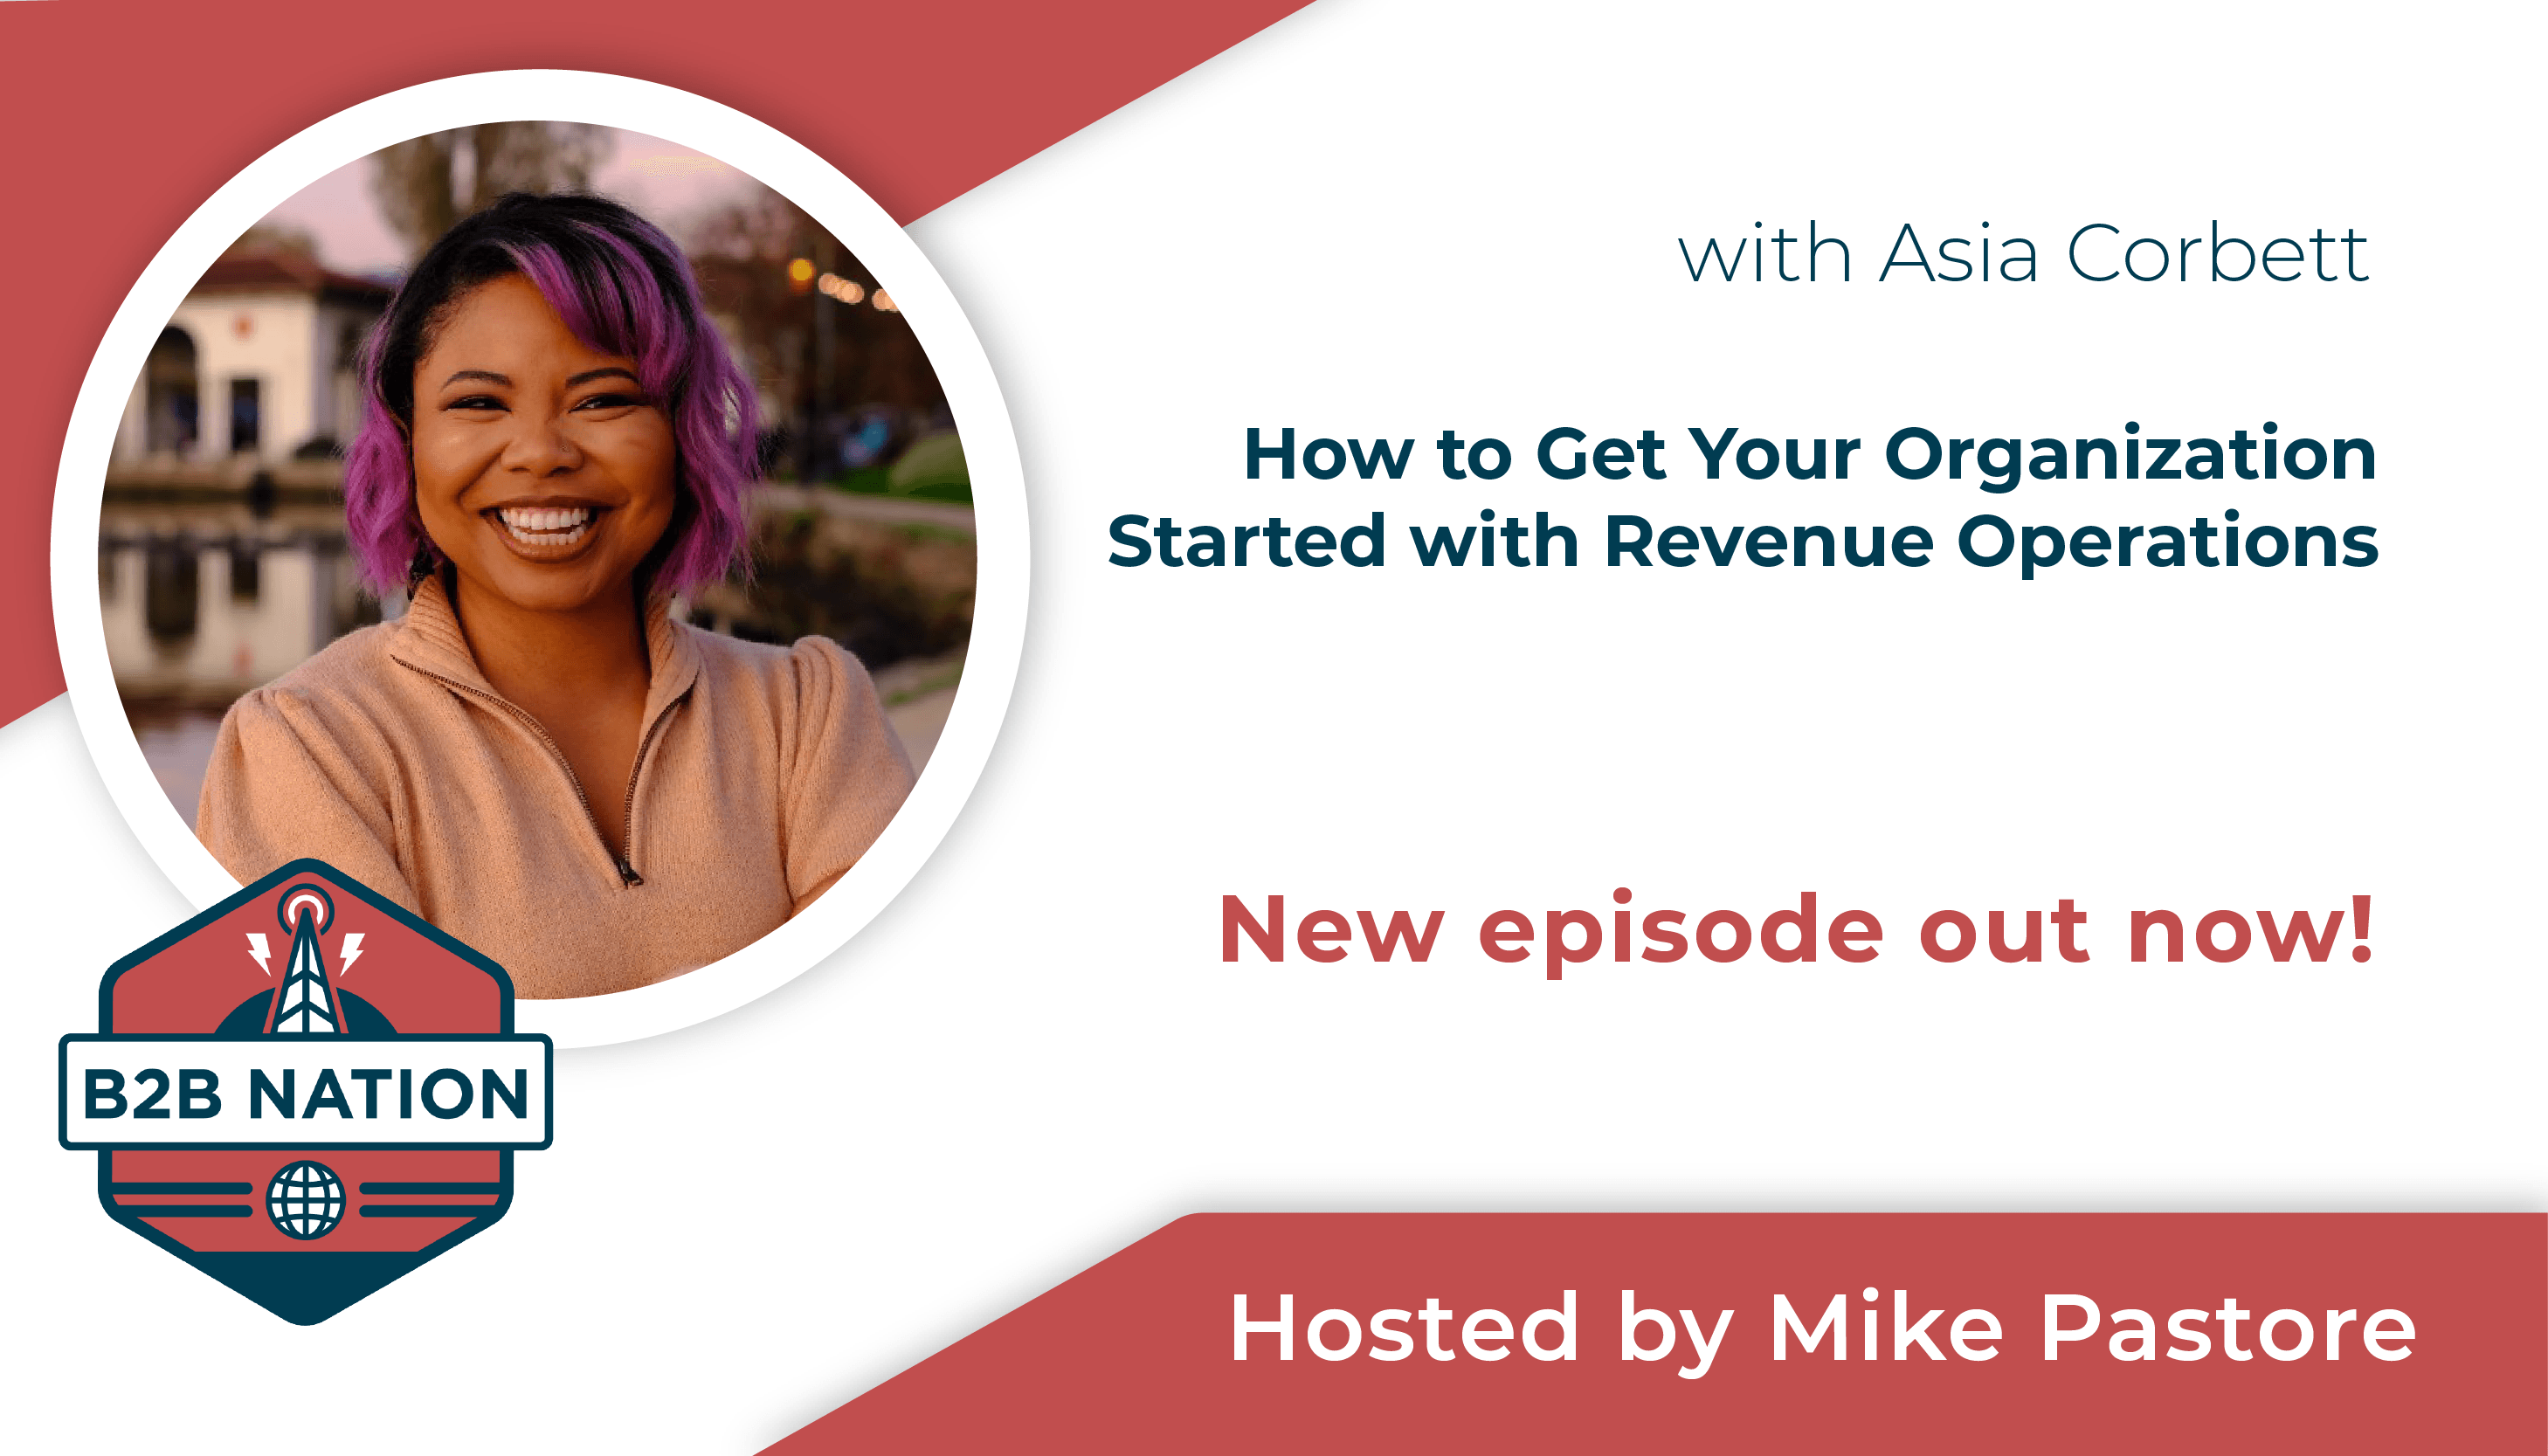 Asia Corbett discusses getting started with revenue operations on B2B Nation.